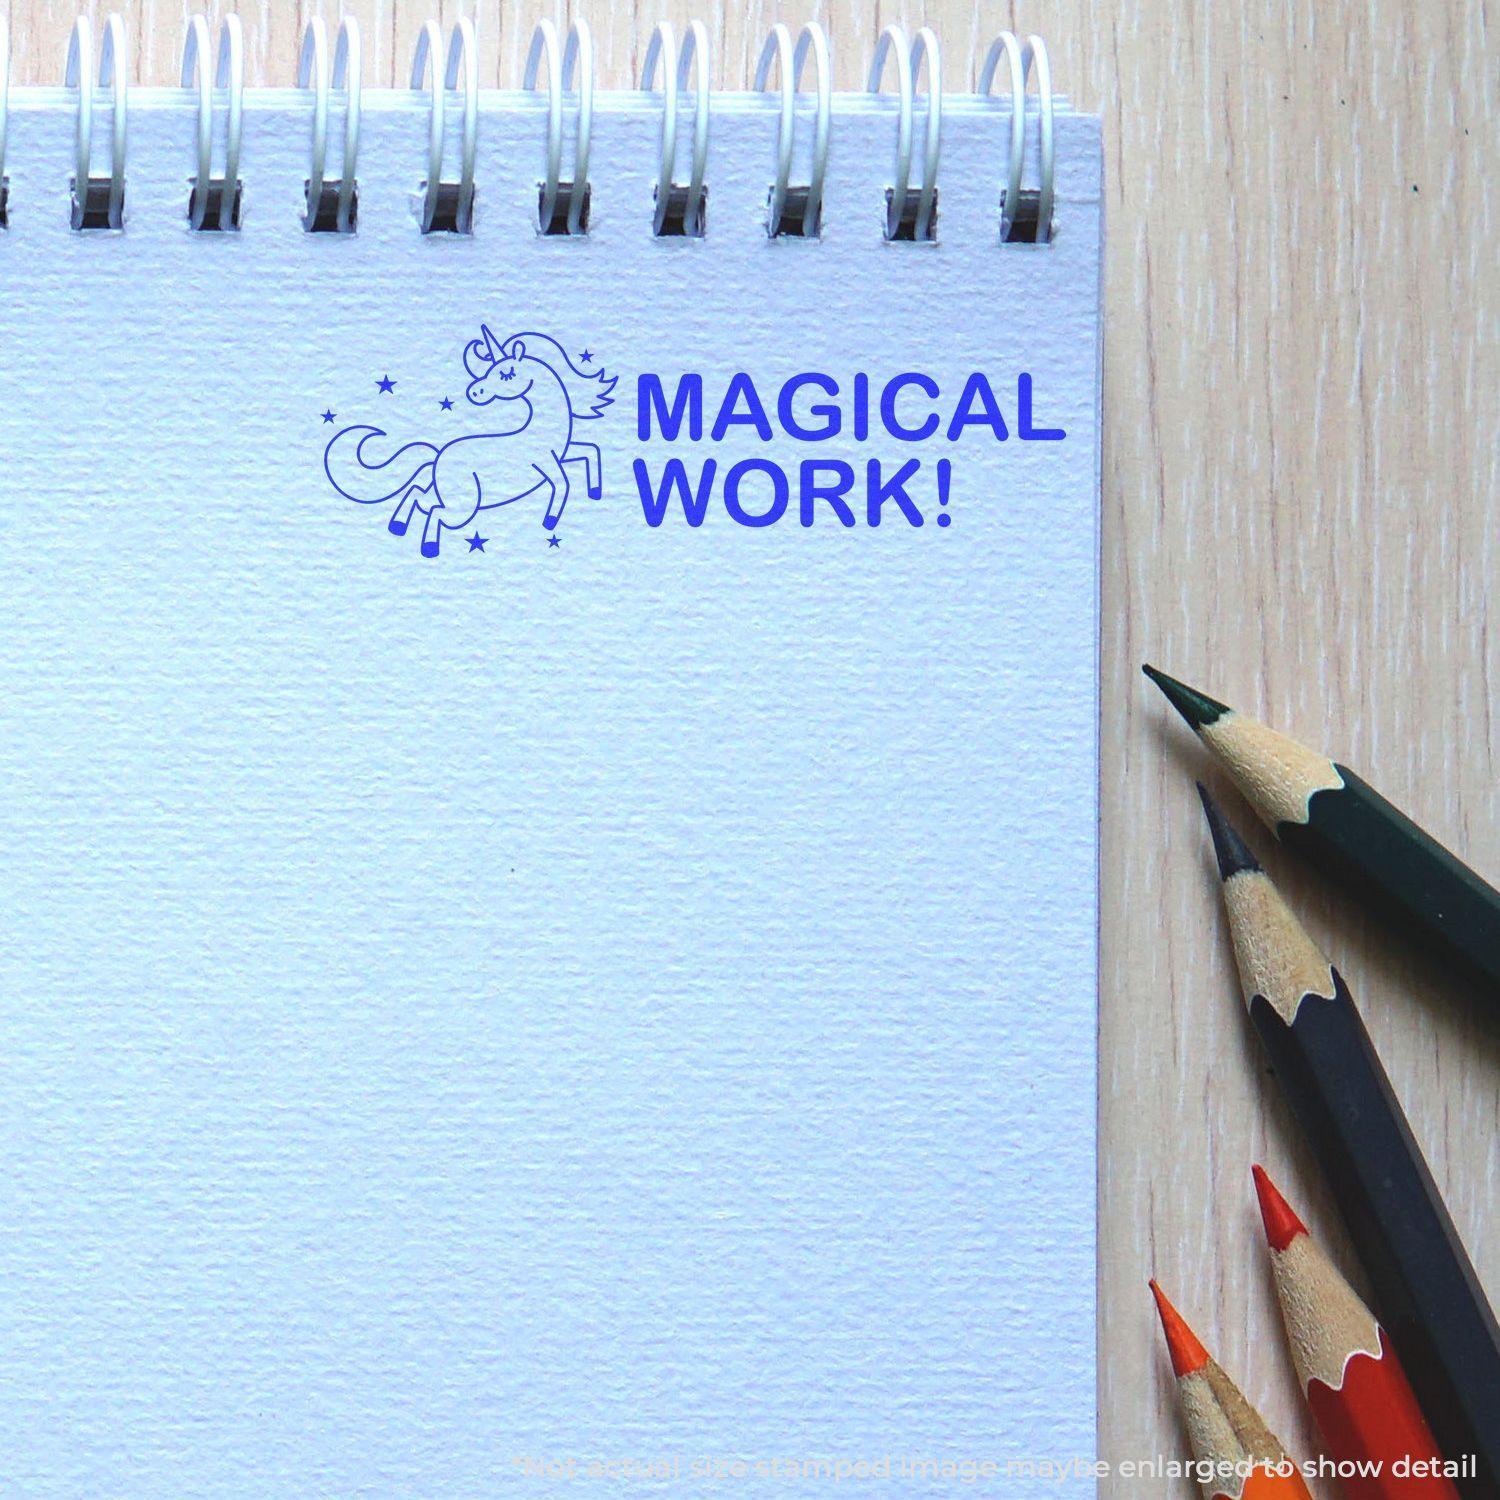 A stock office rubber stamp with a stamped image showing how the text "MAGICAL WORK!" with an image of a unicorn dancing among the stars is displayed after stamping.